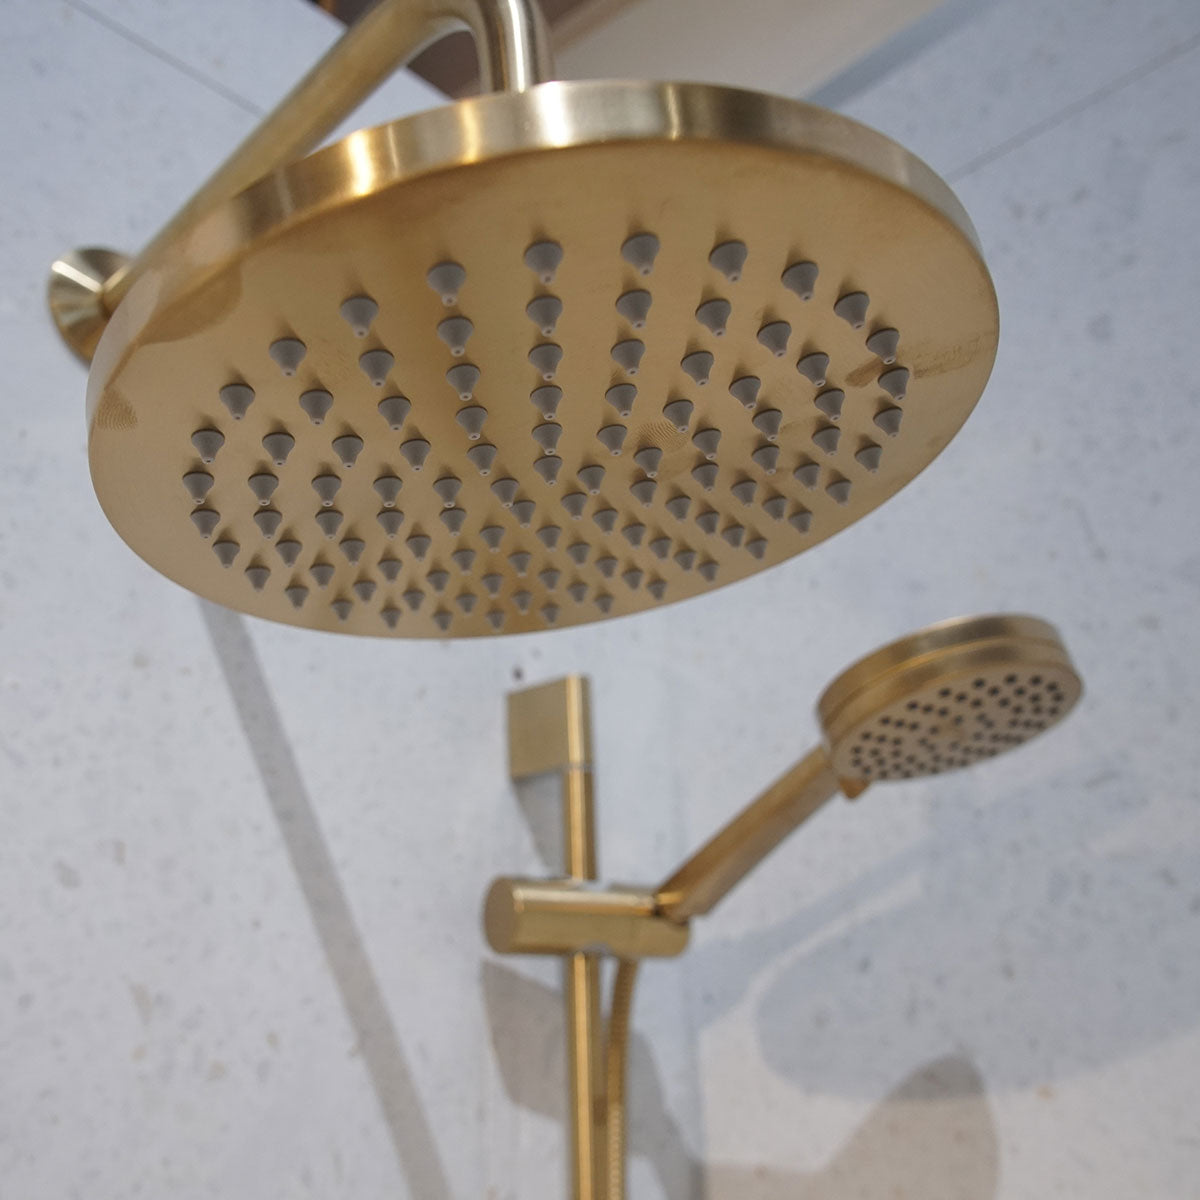 Hoxton Shower Head with Wall Mounted Arm